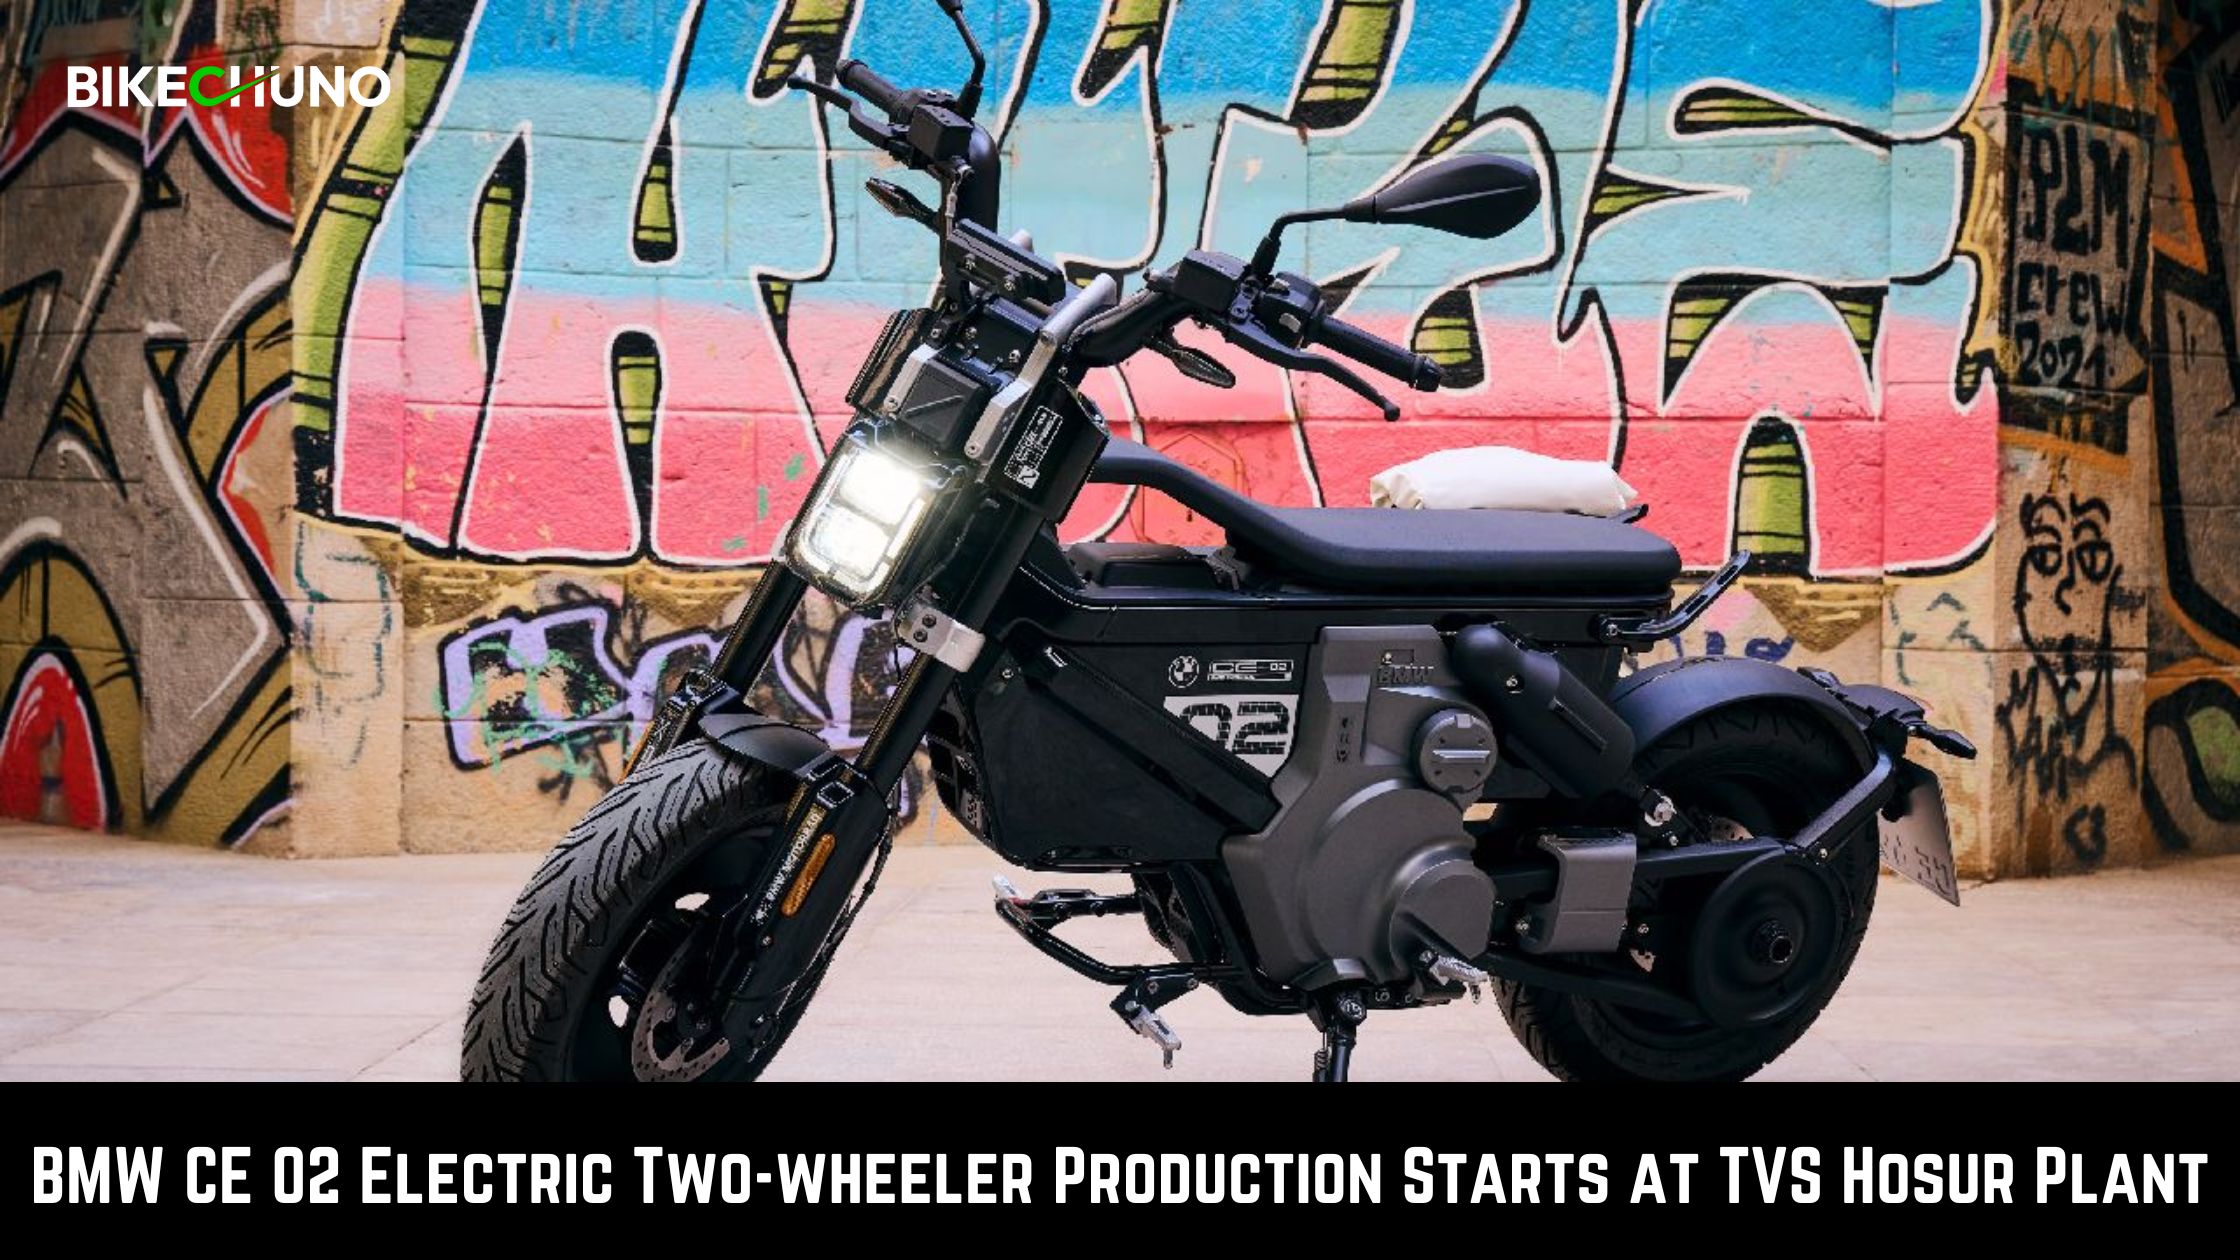 BMW-CE-02-Electric-Two-wheeler-Production-Starts-at-TVS-Hosur-Plant